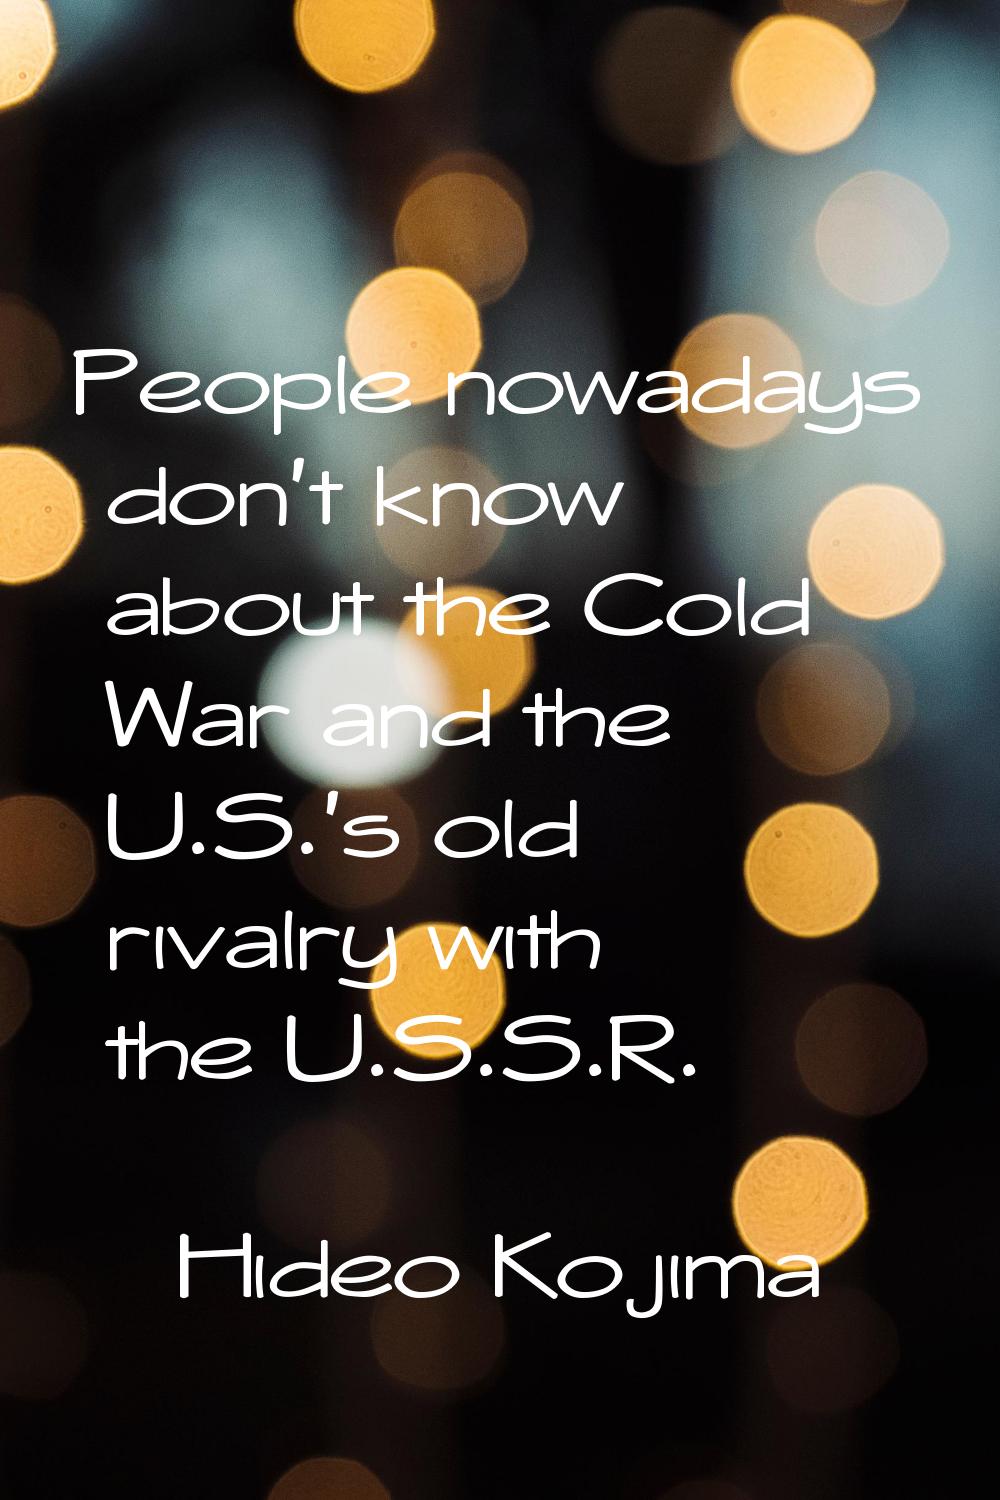 People nowadays don't know about the Cold War and the U.S.'s old rivalry with the U.S.S.R.